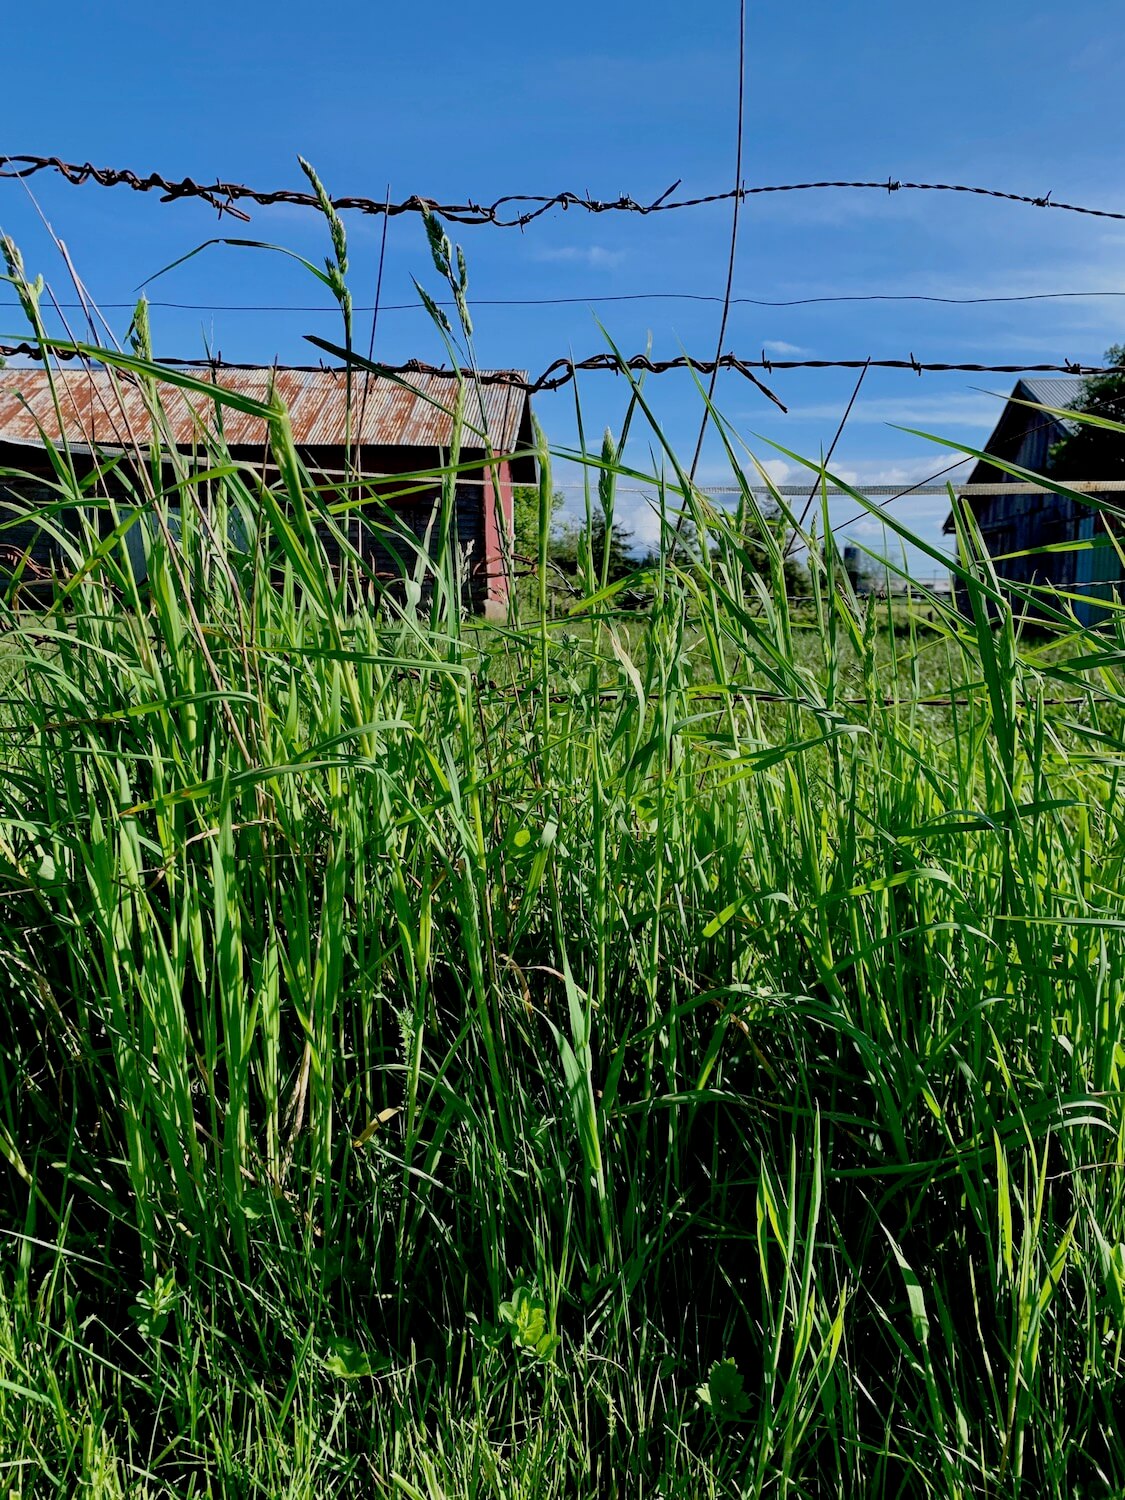 The farms around Tillamook Oregon have lots of green grass, as shown in the photo against a barb wire fence with a red barn in the background and blue sky above.